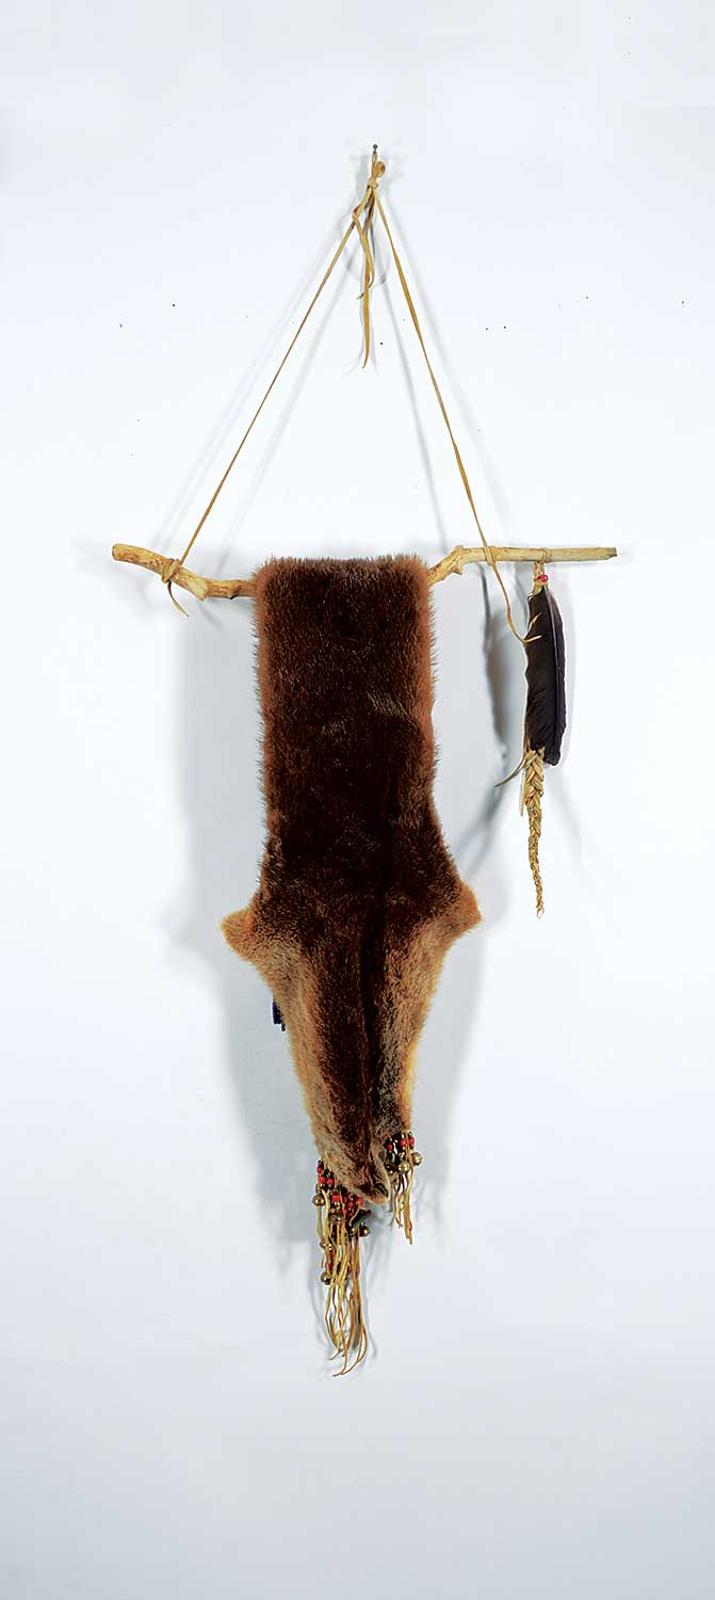 First Nations Basket School - Untitled - Ceremonial Otter Pipe Bag